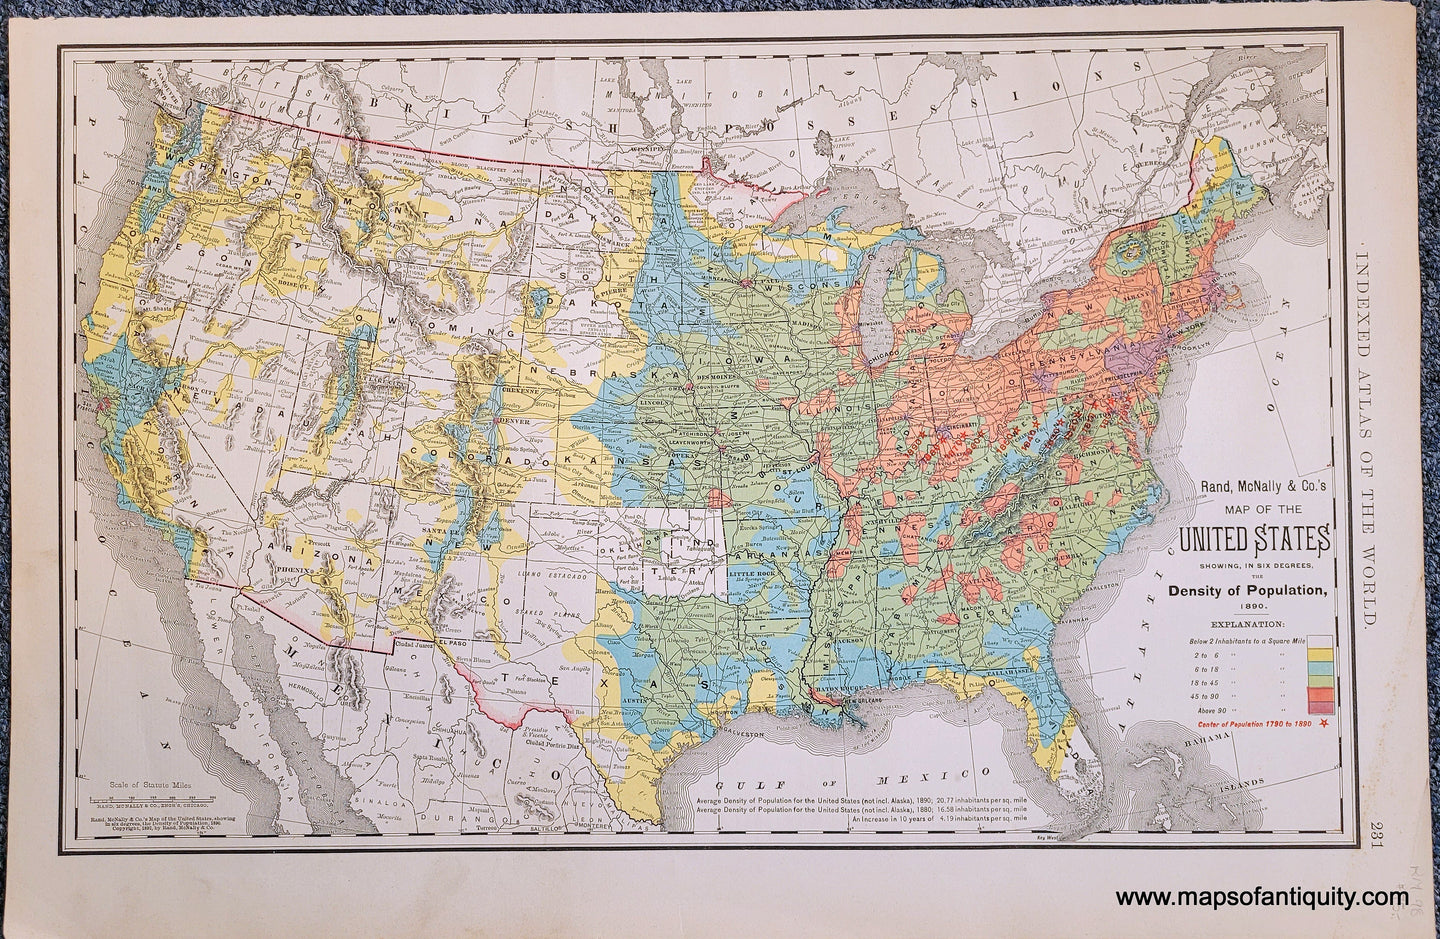 Genuine-Antique-Map-Map-of-the-United-States-showing-in-six-degrees-the-Density-of-Population-1890-United-States--1898-Rand-McNally-Maps-Of-Antiquity-1800s-19th-century